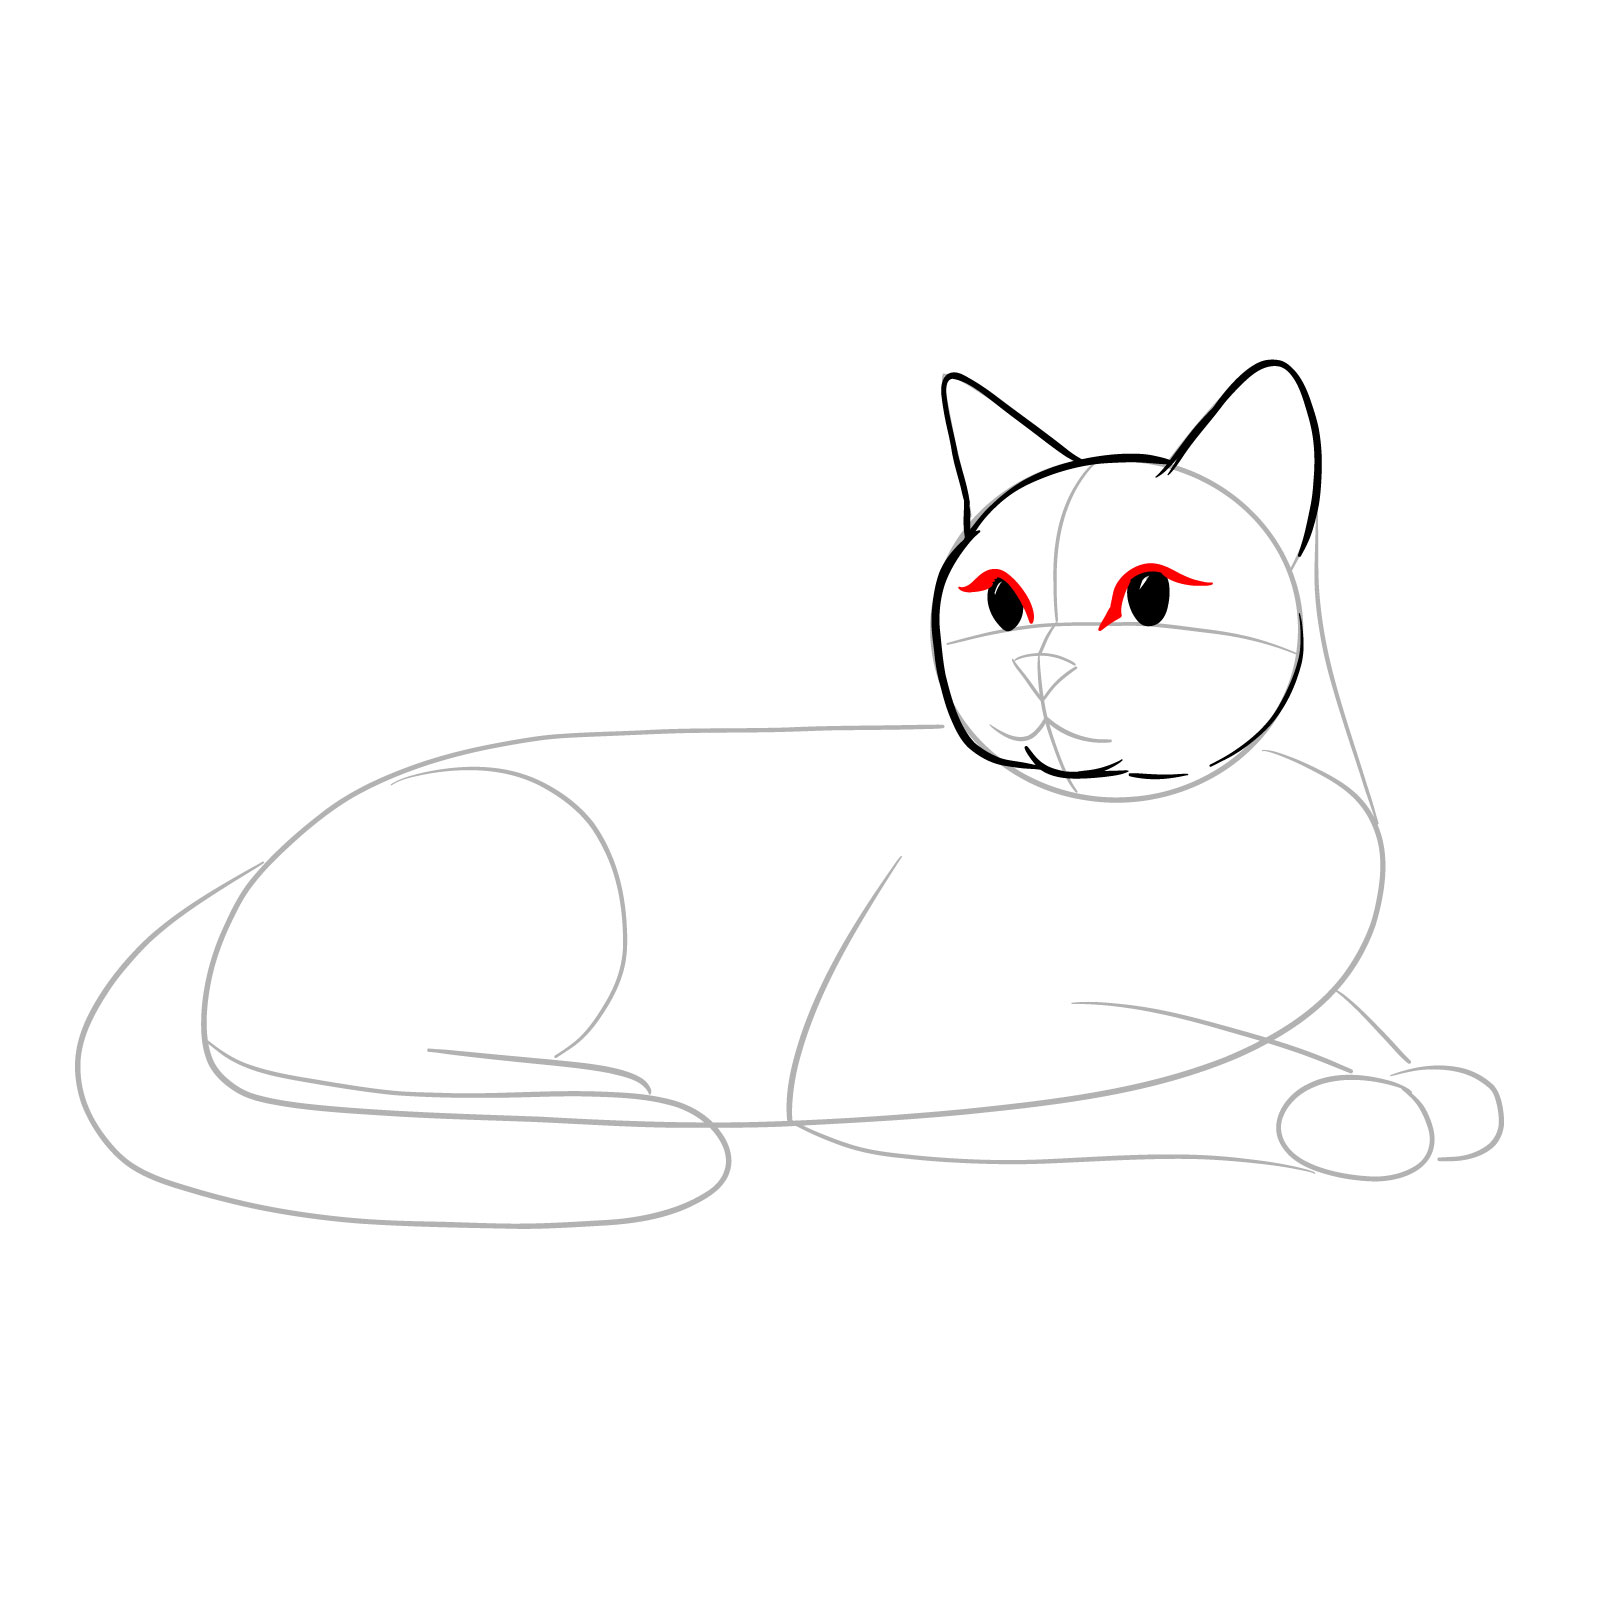 Illustrating the upper eyelids for a realistic cat's eye in a side view - step 06